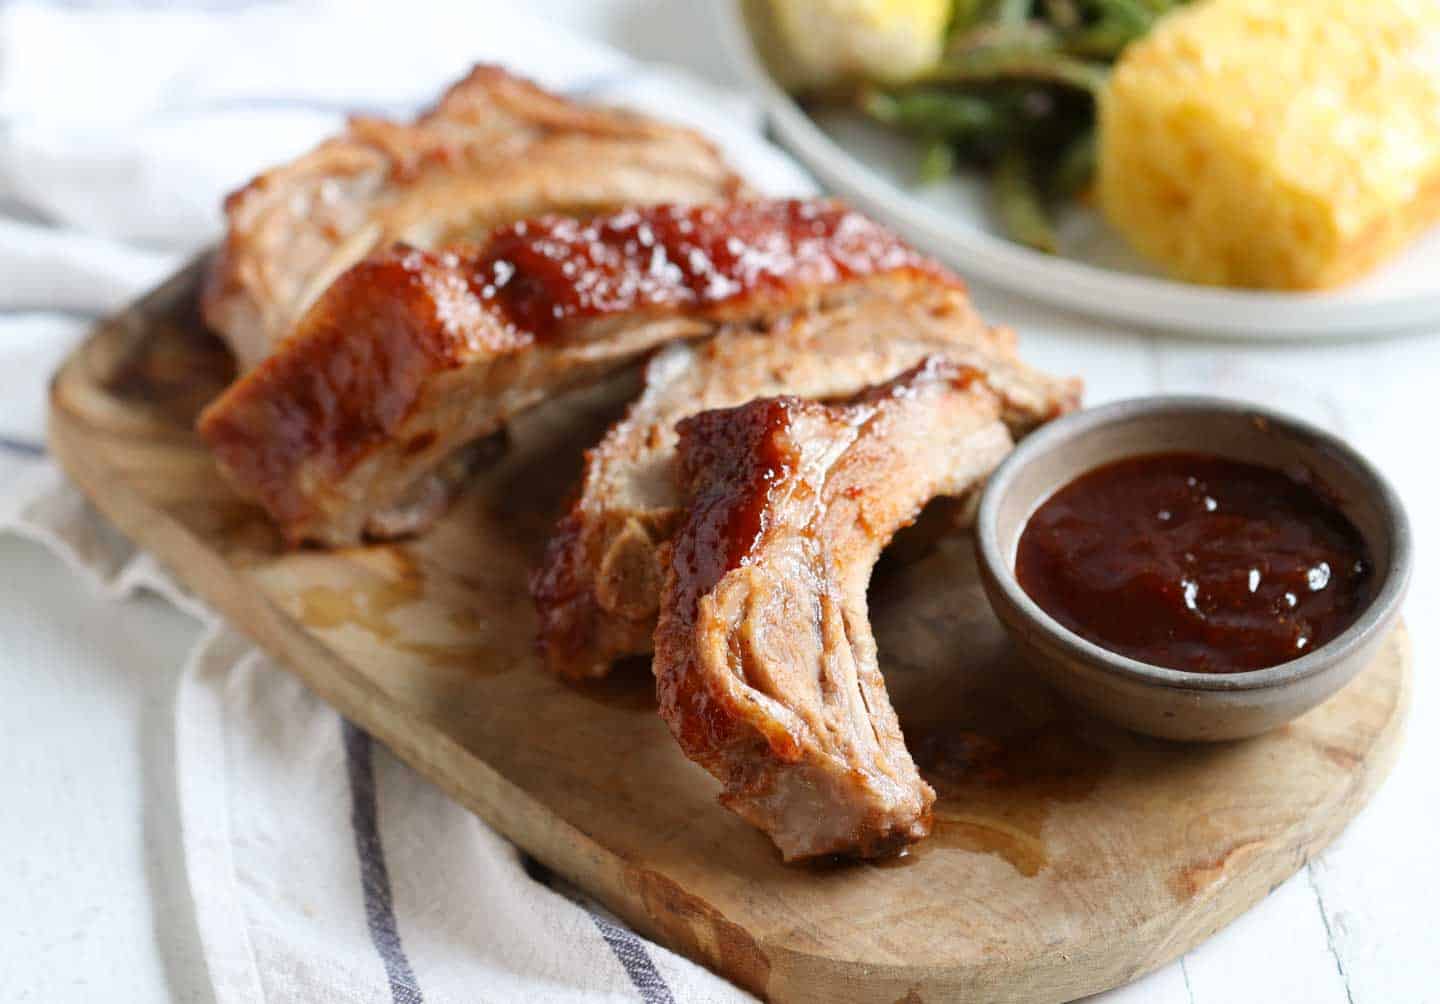 Juicy bbq ribs made in the oven